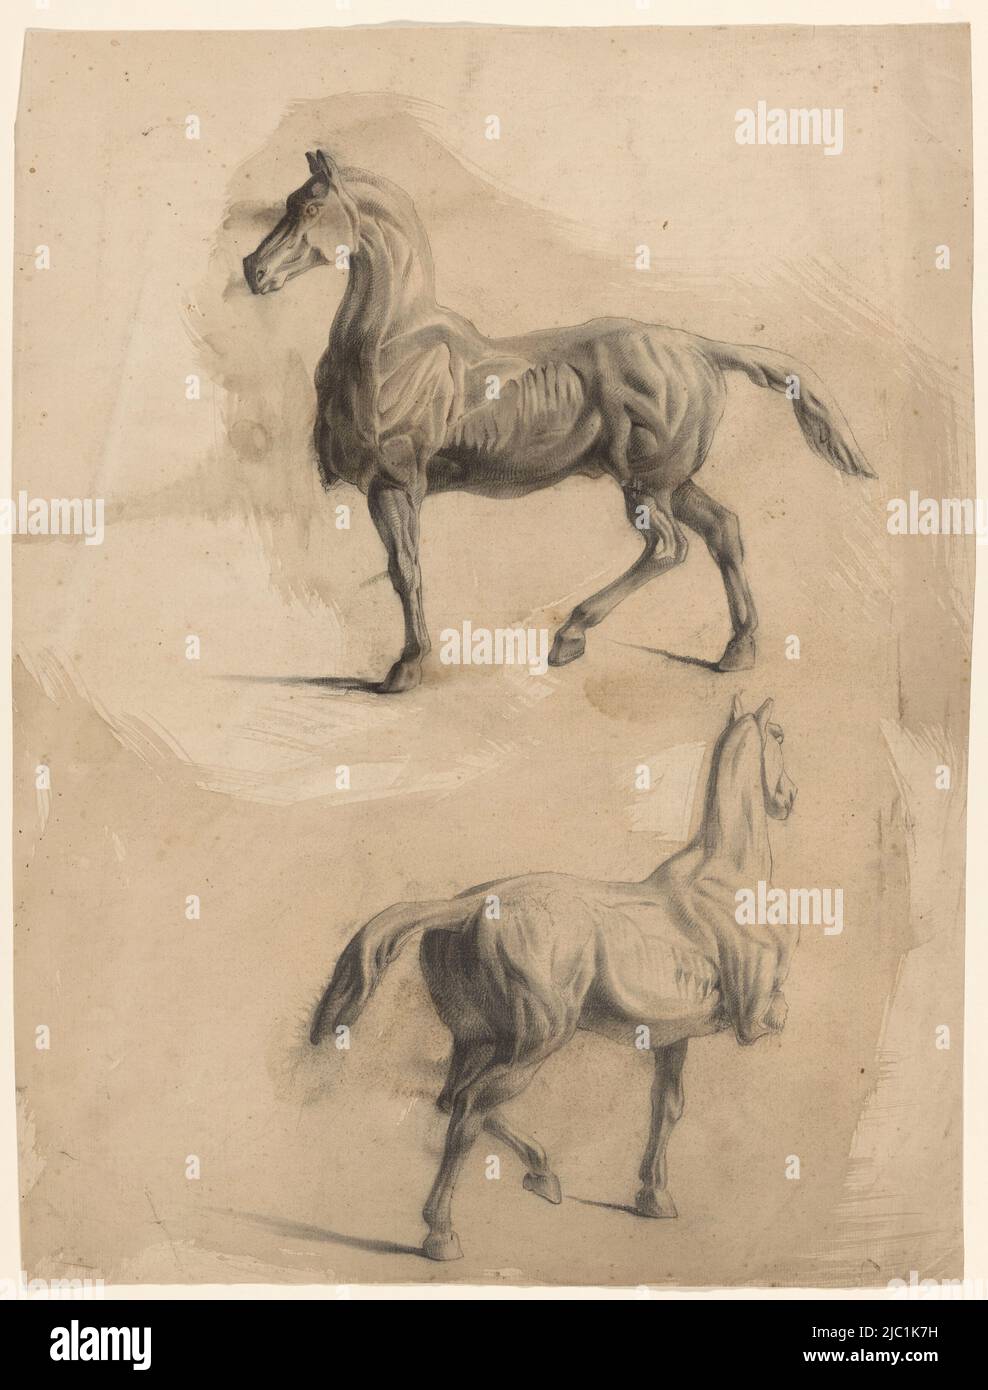 Two anatomy studies of a horse, draughtsman: Johannes Tavenraat, 1819 - 1881, prepared paper, h 530 mm × w 402 mm Stock Photo